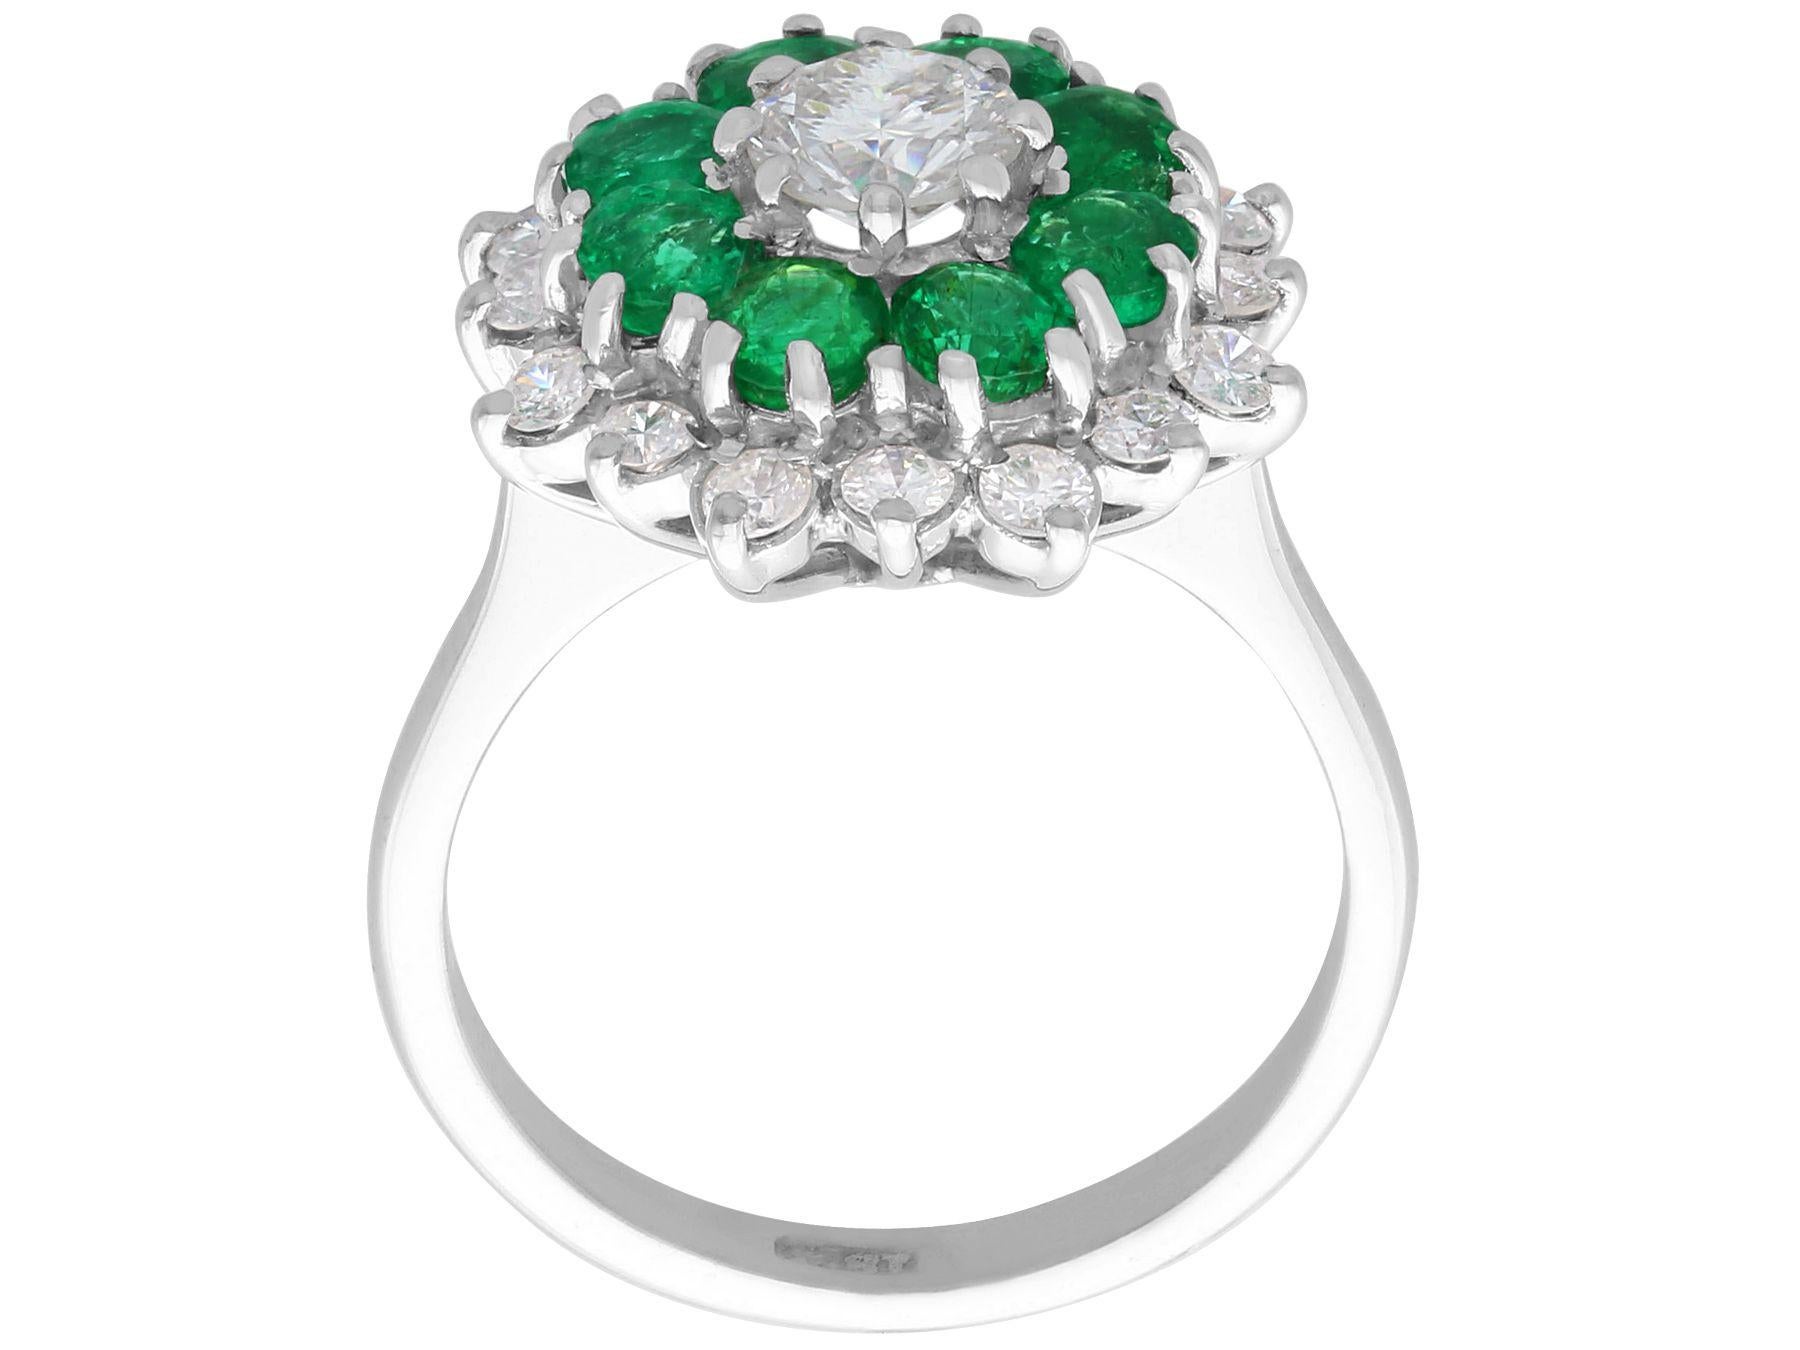 Women's or Men's Vintage 1.23 Carat Diamond and Emerald White Gold Cocktail Ring, Circa 1970 For Sale